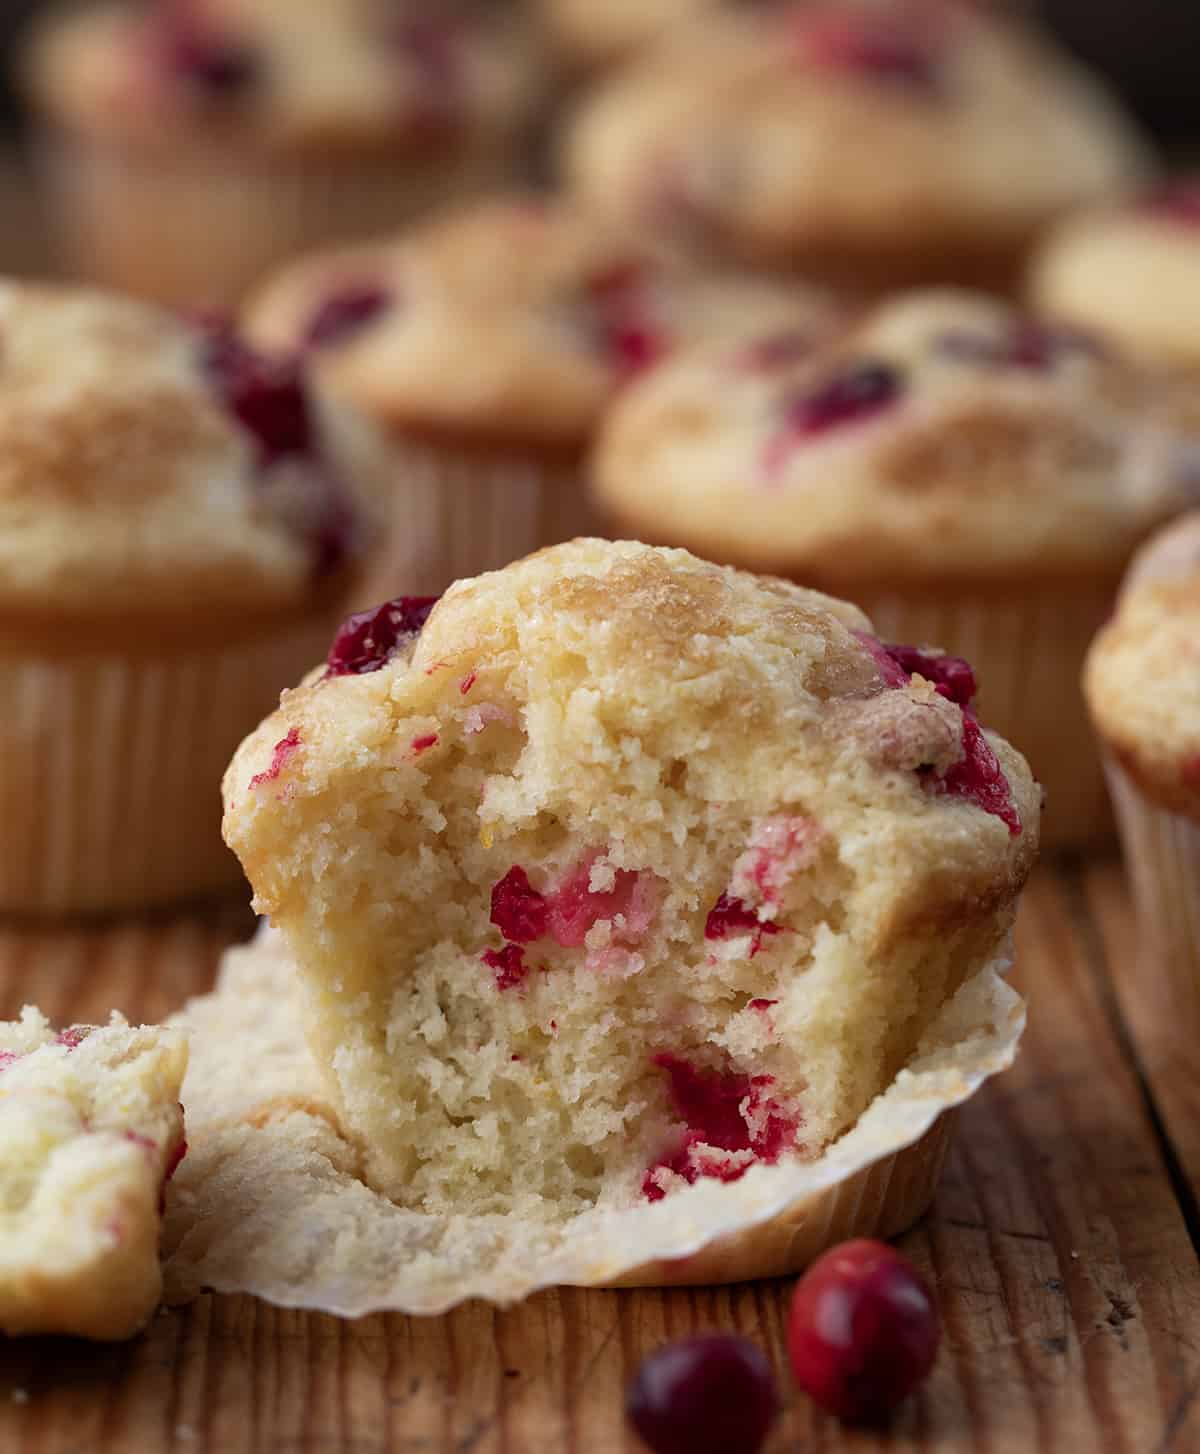 One Cranberry Orange Muffins in the Pulled Down Wrapper with a Bite Removed.